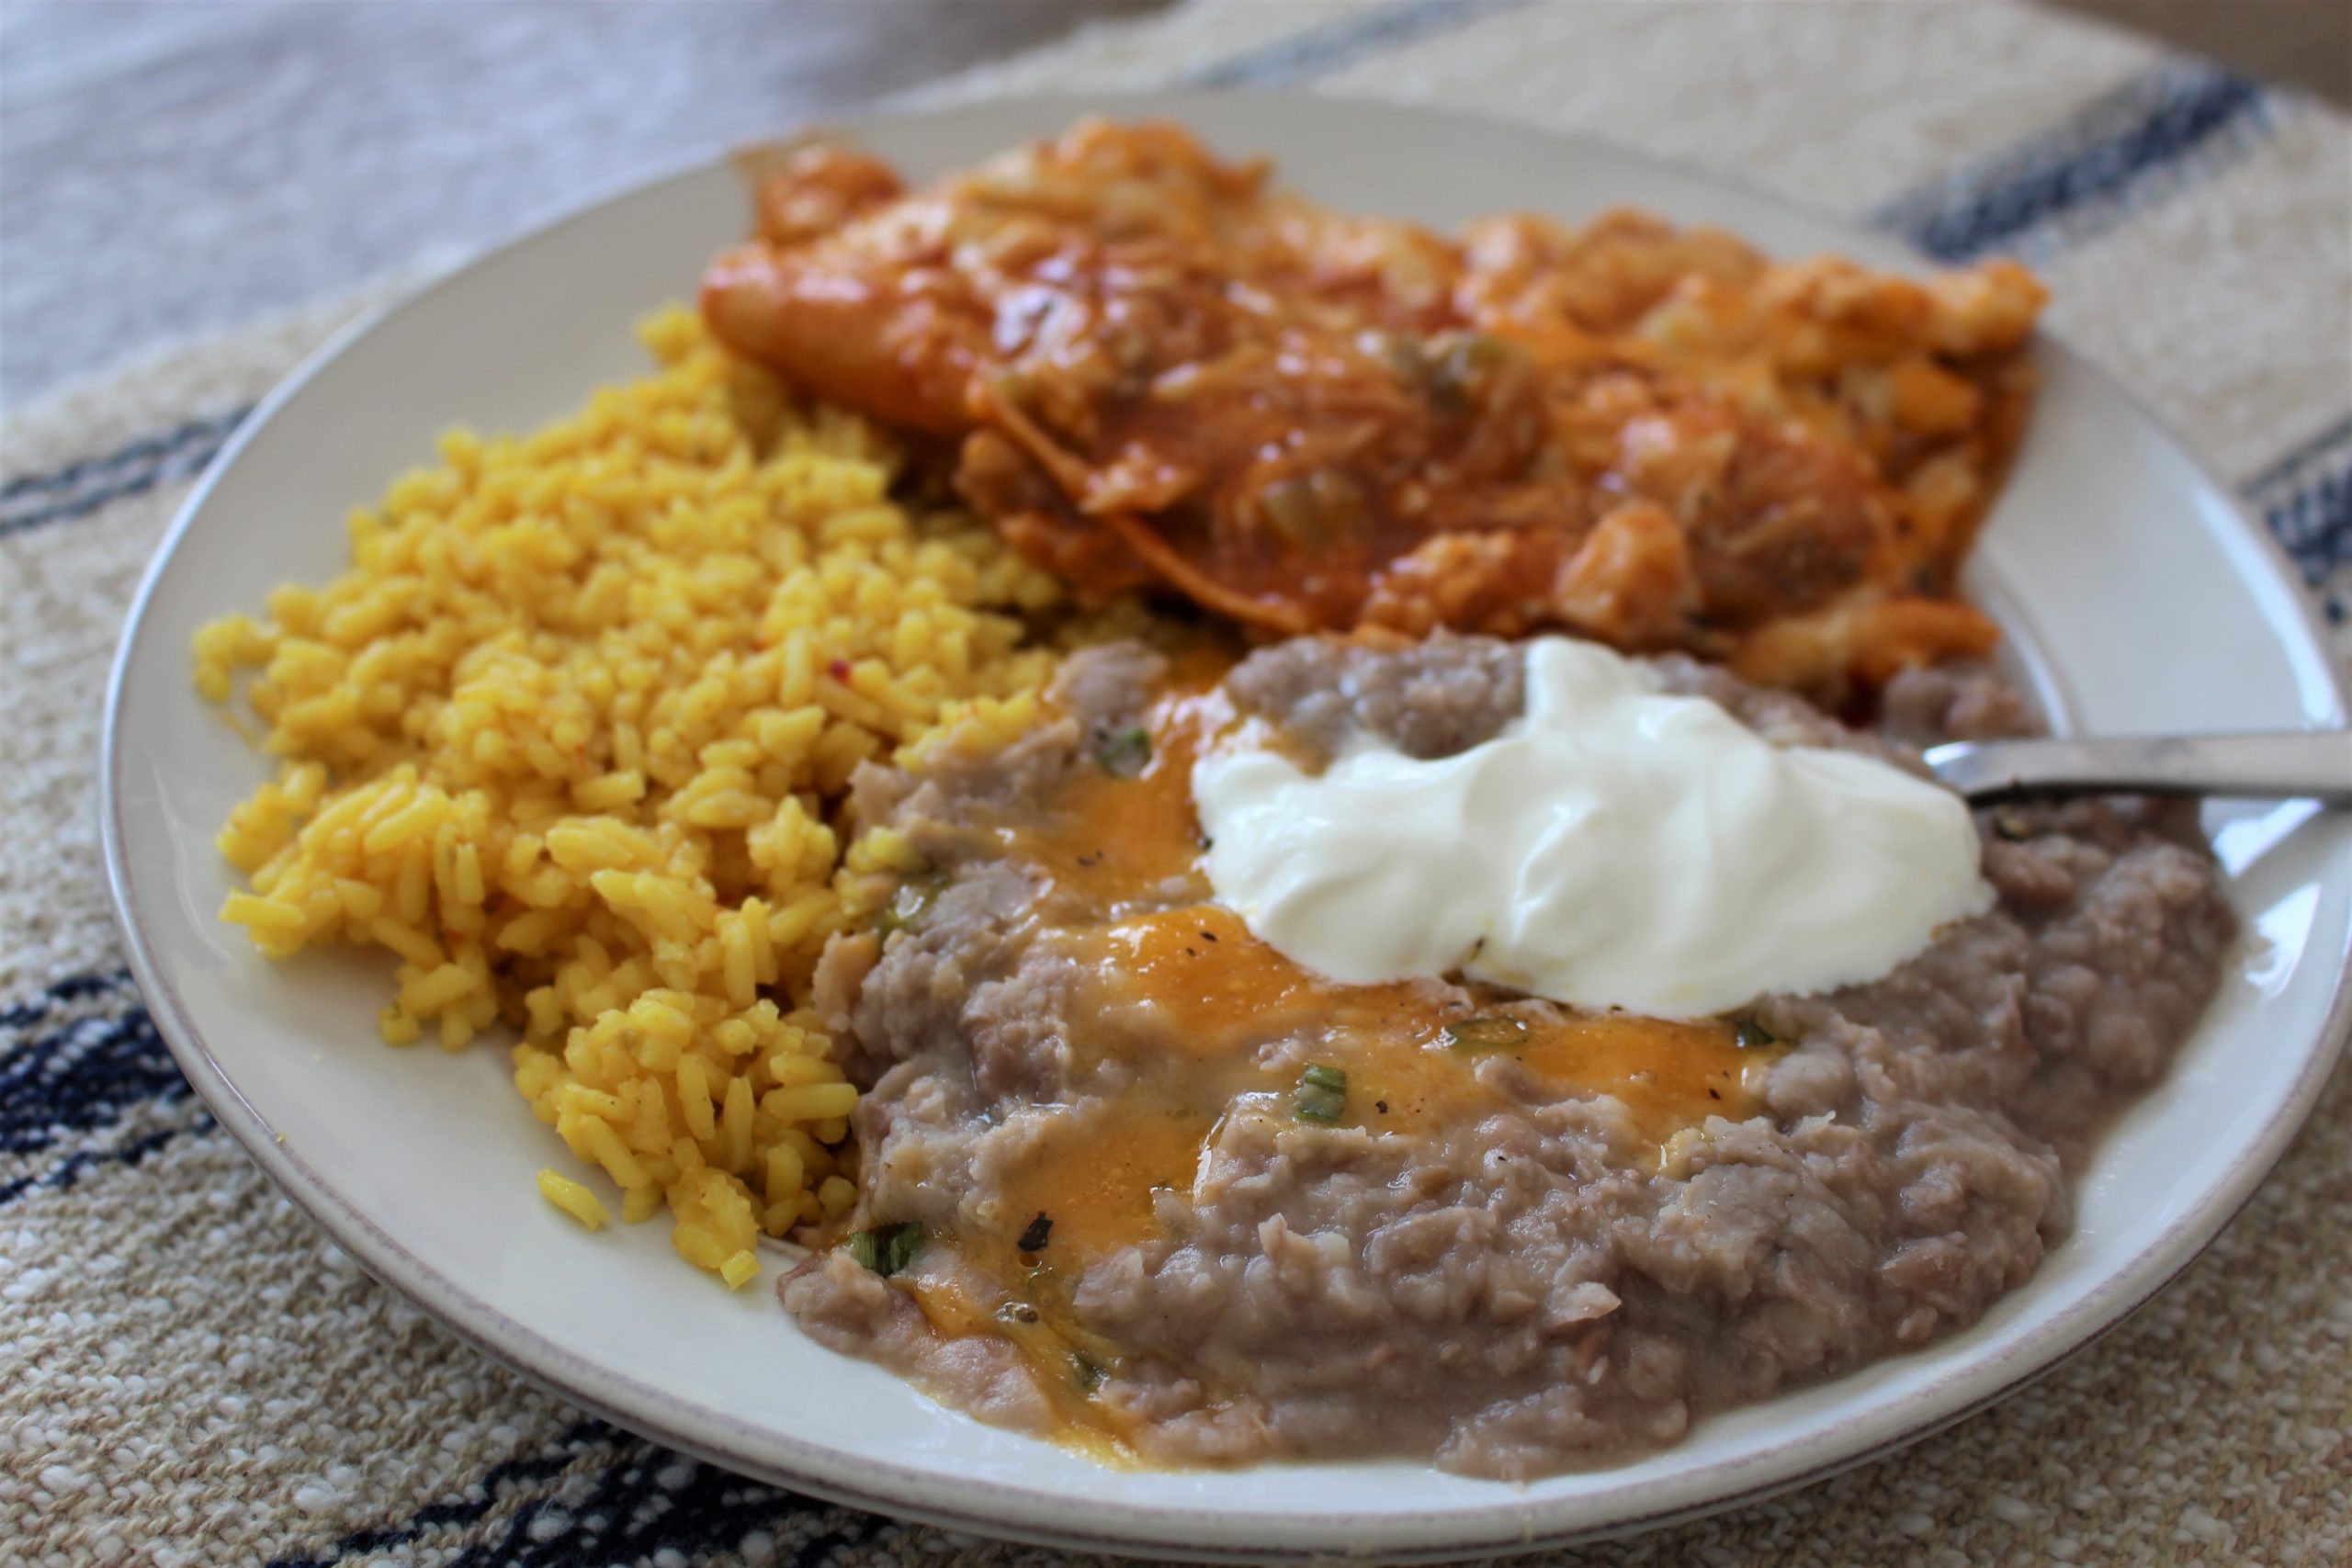 Easy Mexican Side Dish Recipes – Refried Beans